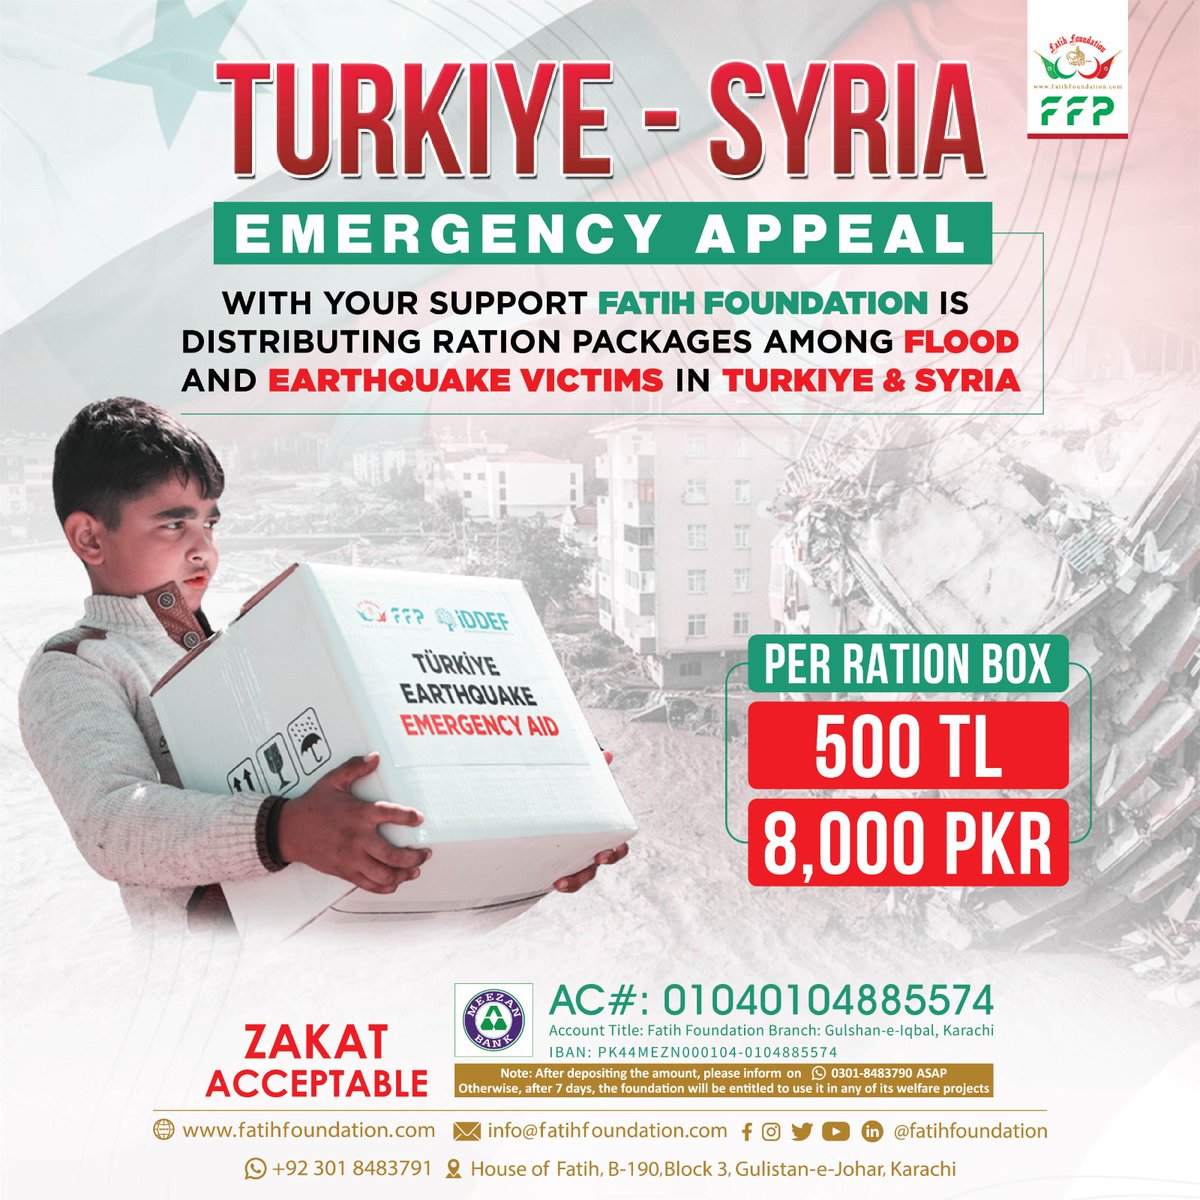 🤝Join us in making a difference! 
With your support, Fatih Foundation is distributing essential ration packages to those affected by the recent earthquake.
#FatihFoundation #EarthquakeRelief #TogetherWeCan #turkiye #Syria